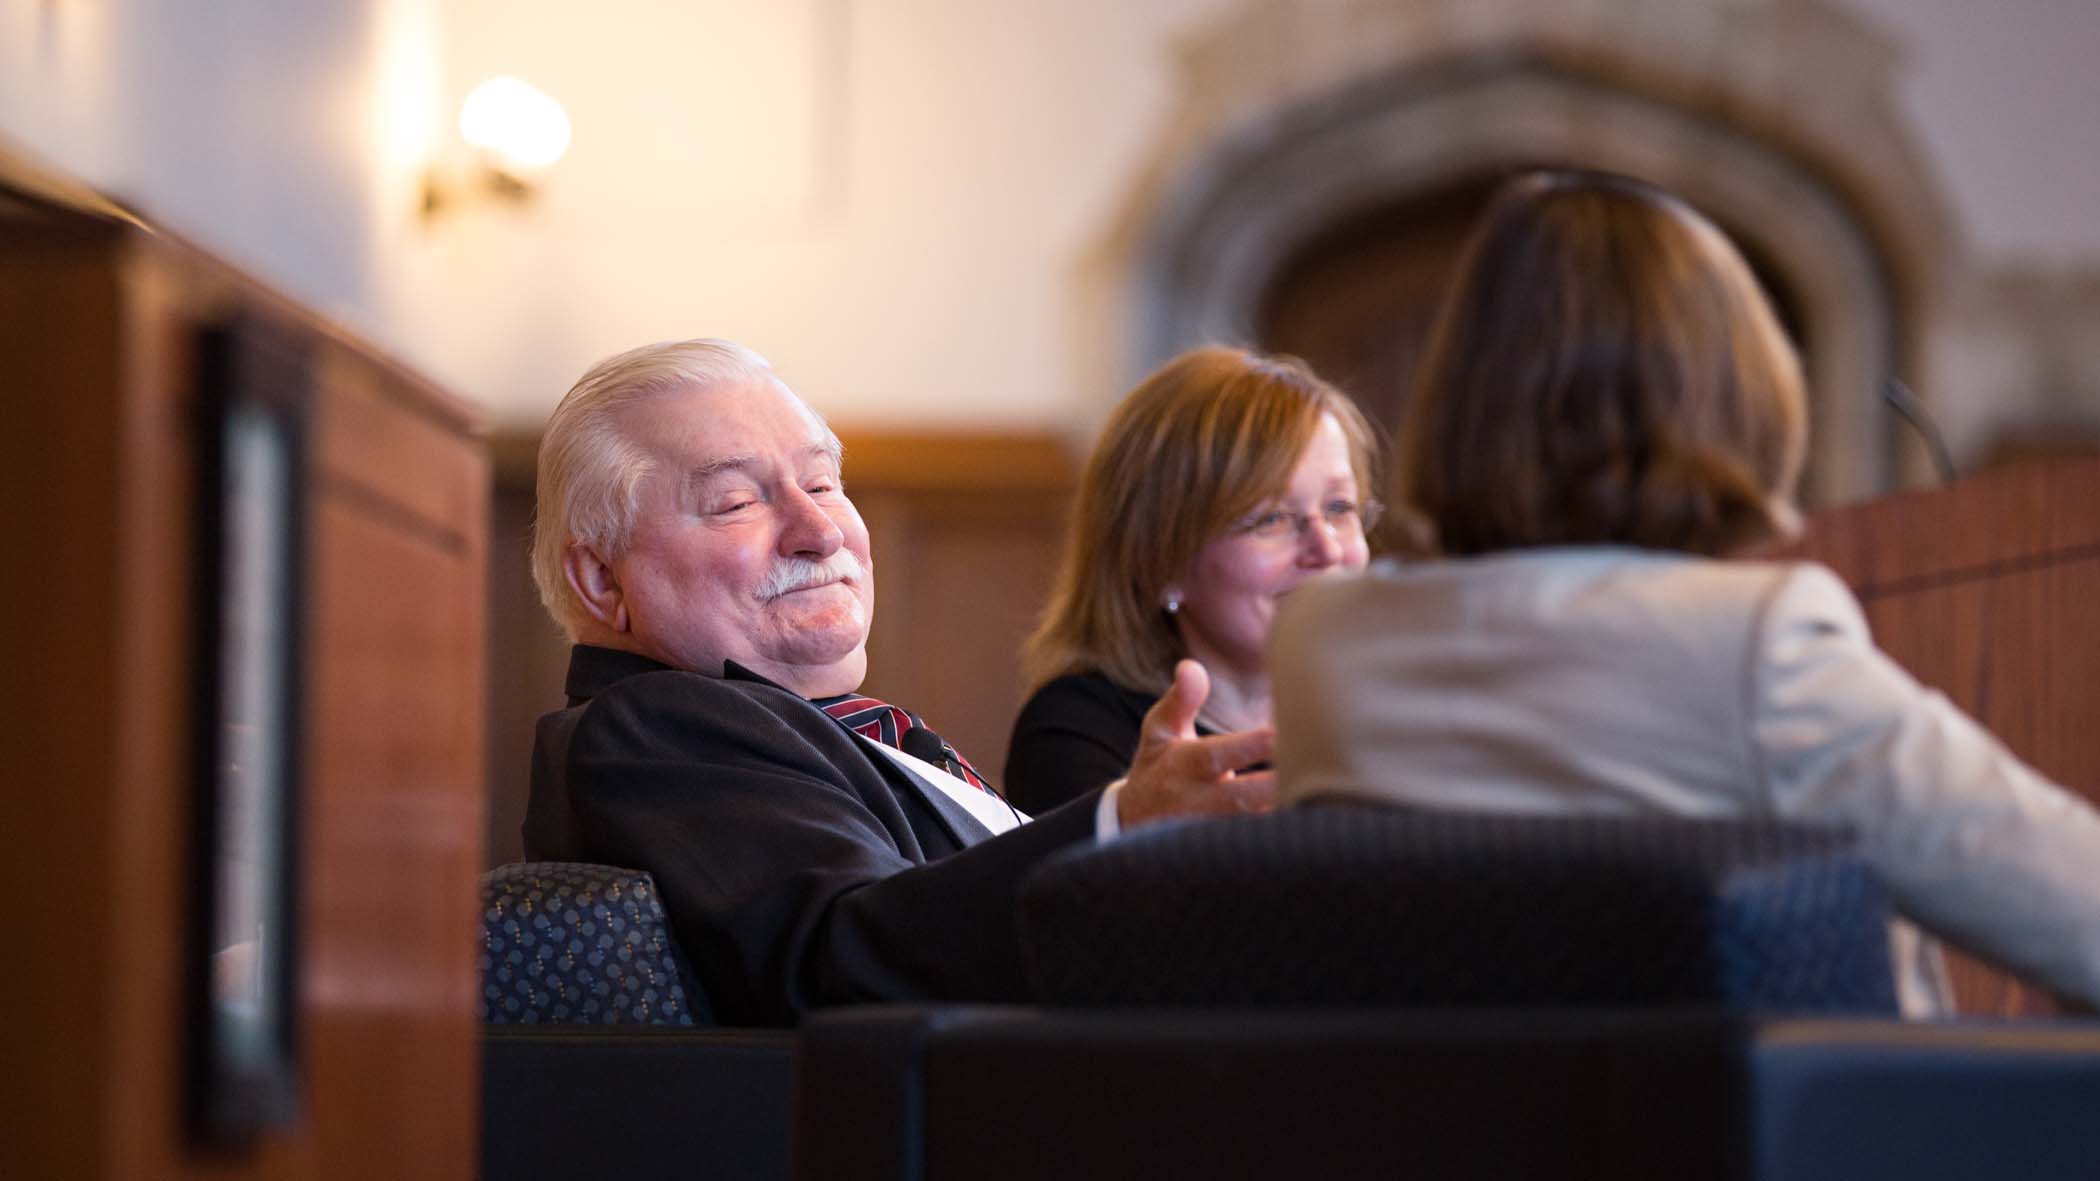 Lech Walesa in his seat at Keller Center event.